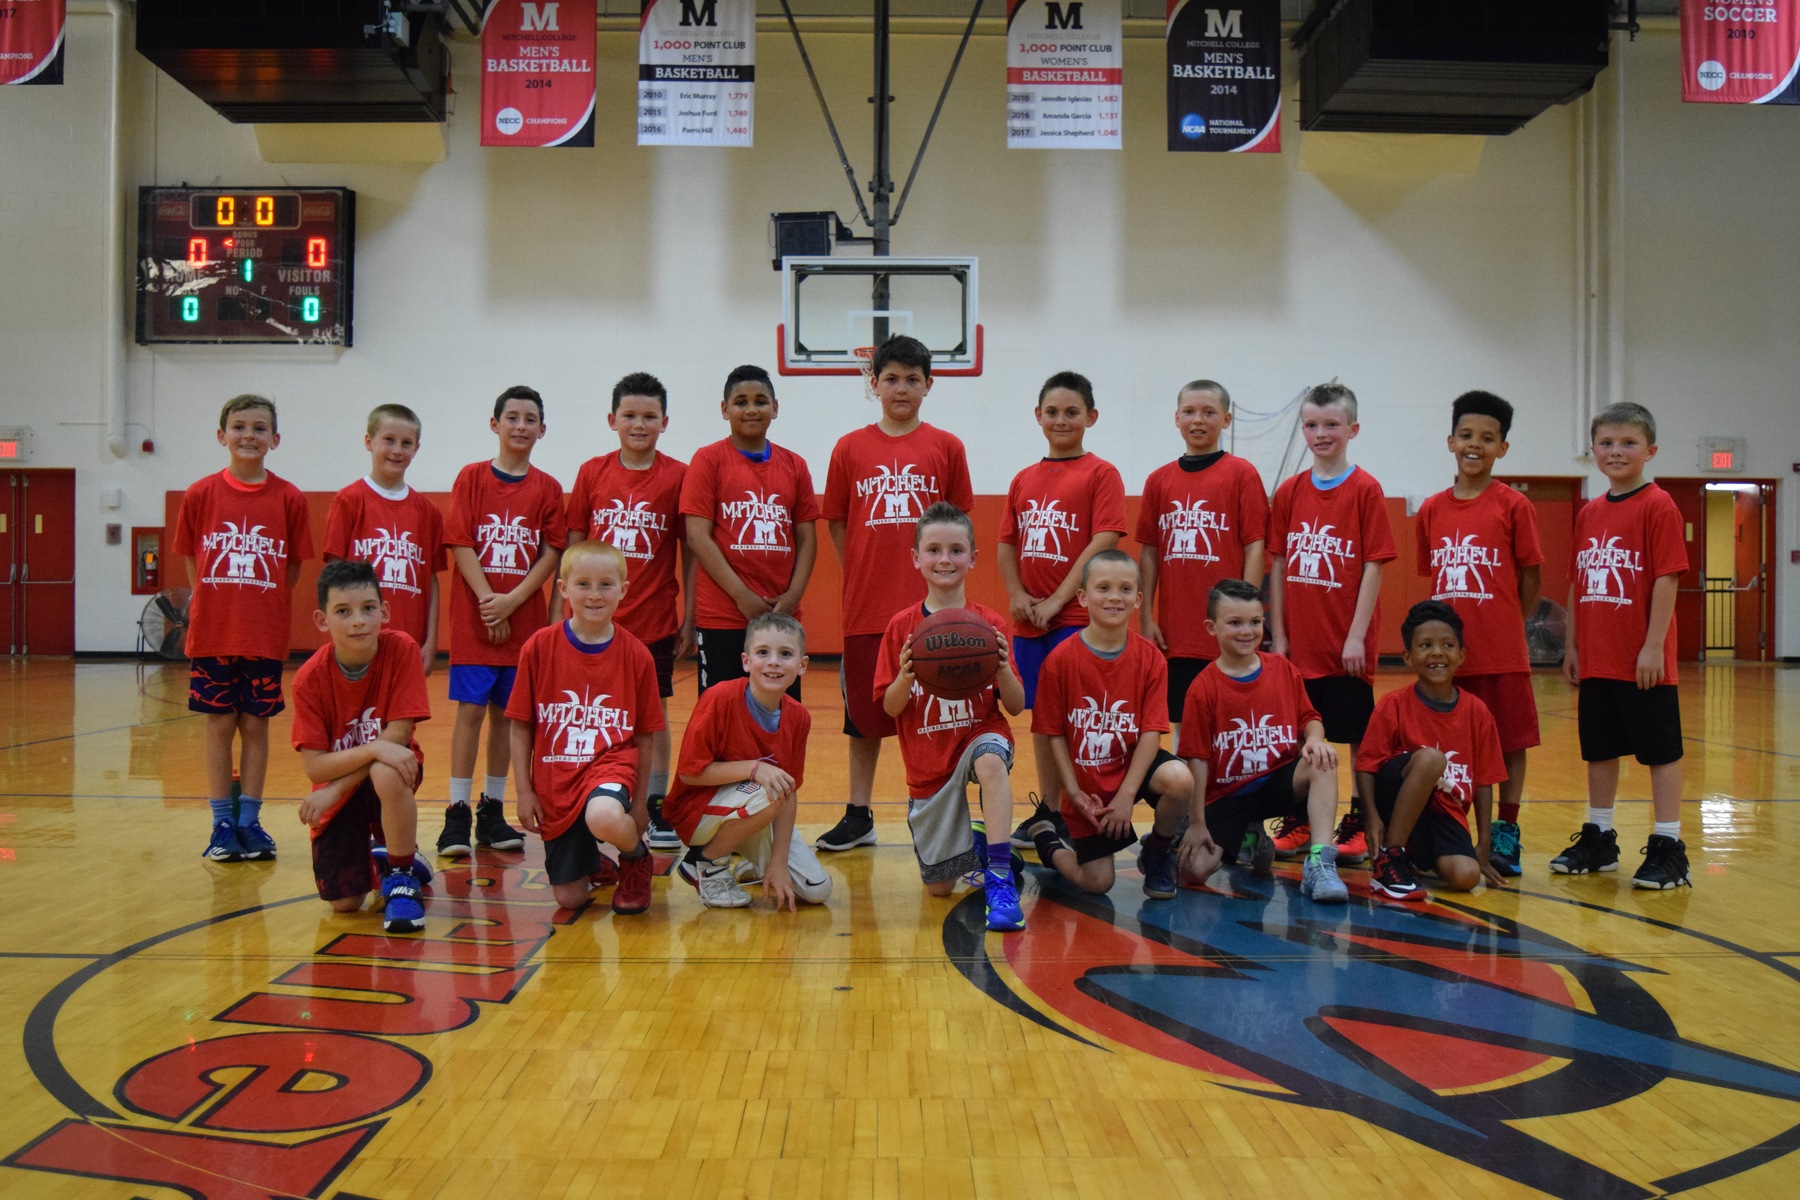 Dates Announced for 2021 Mitchell Basketball Skills Academy